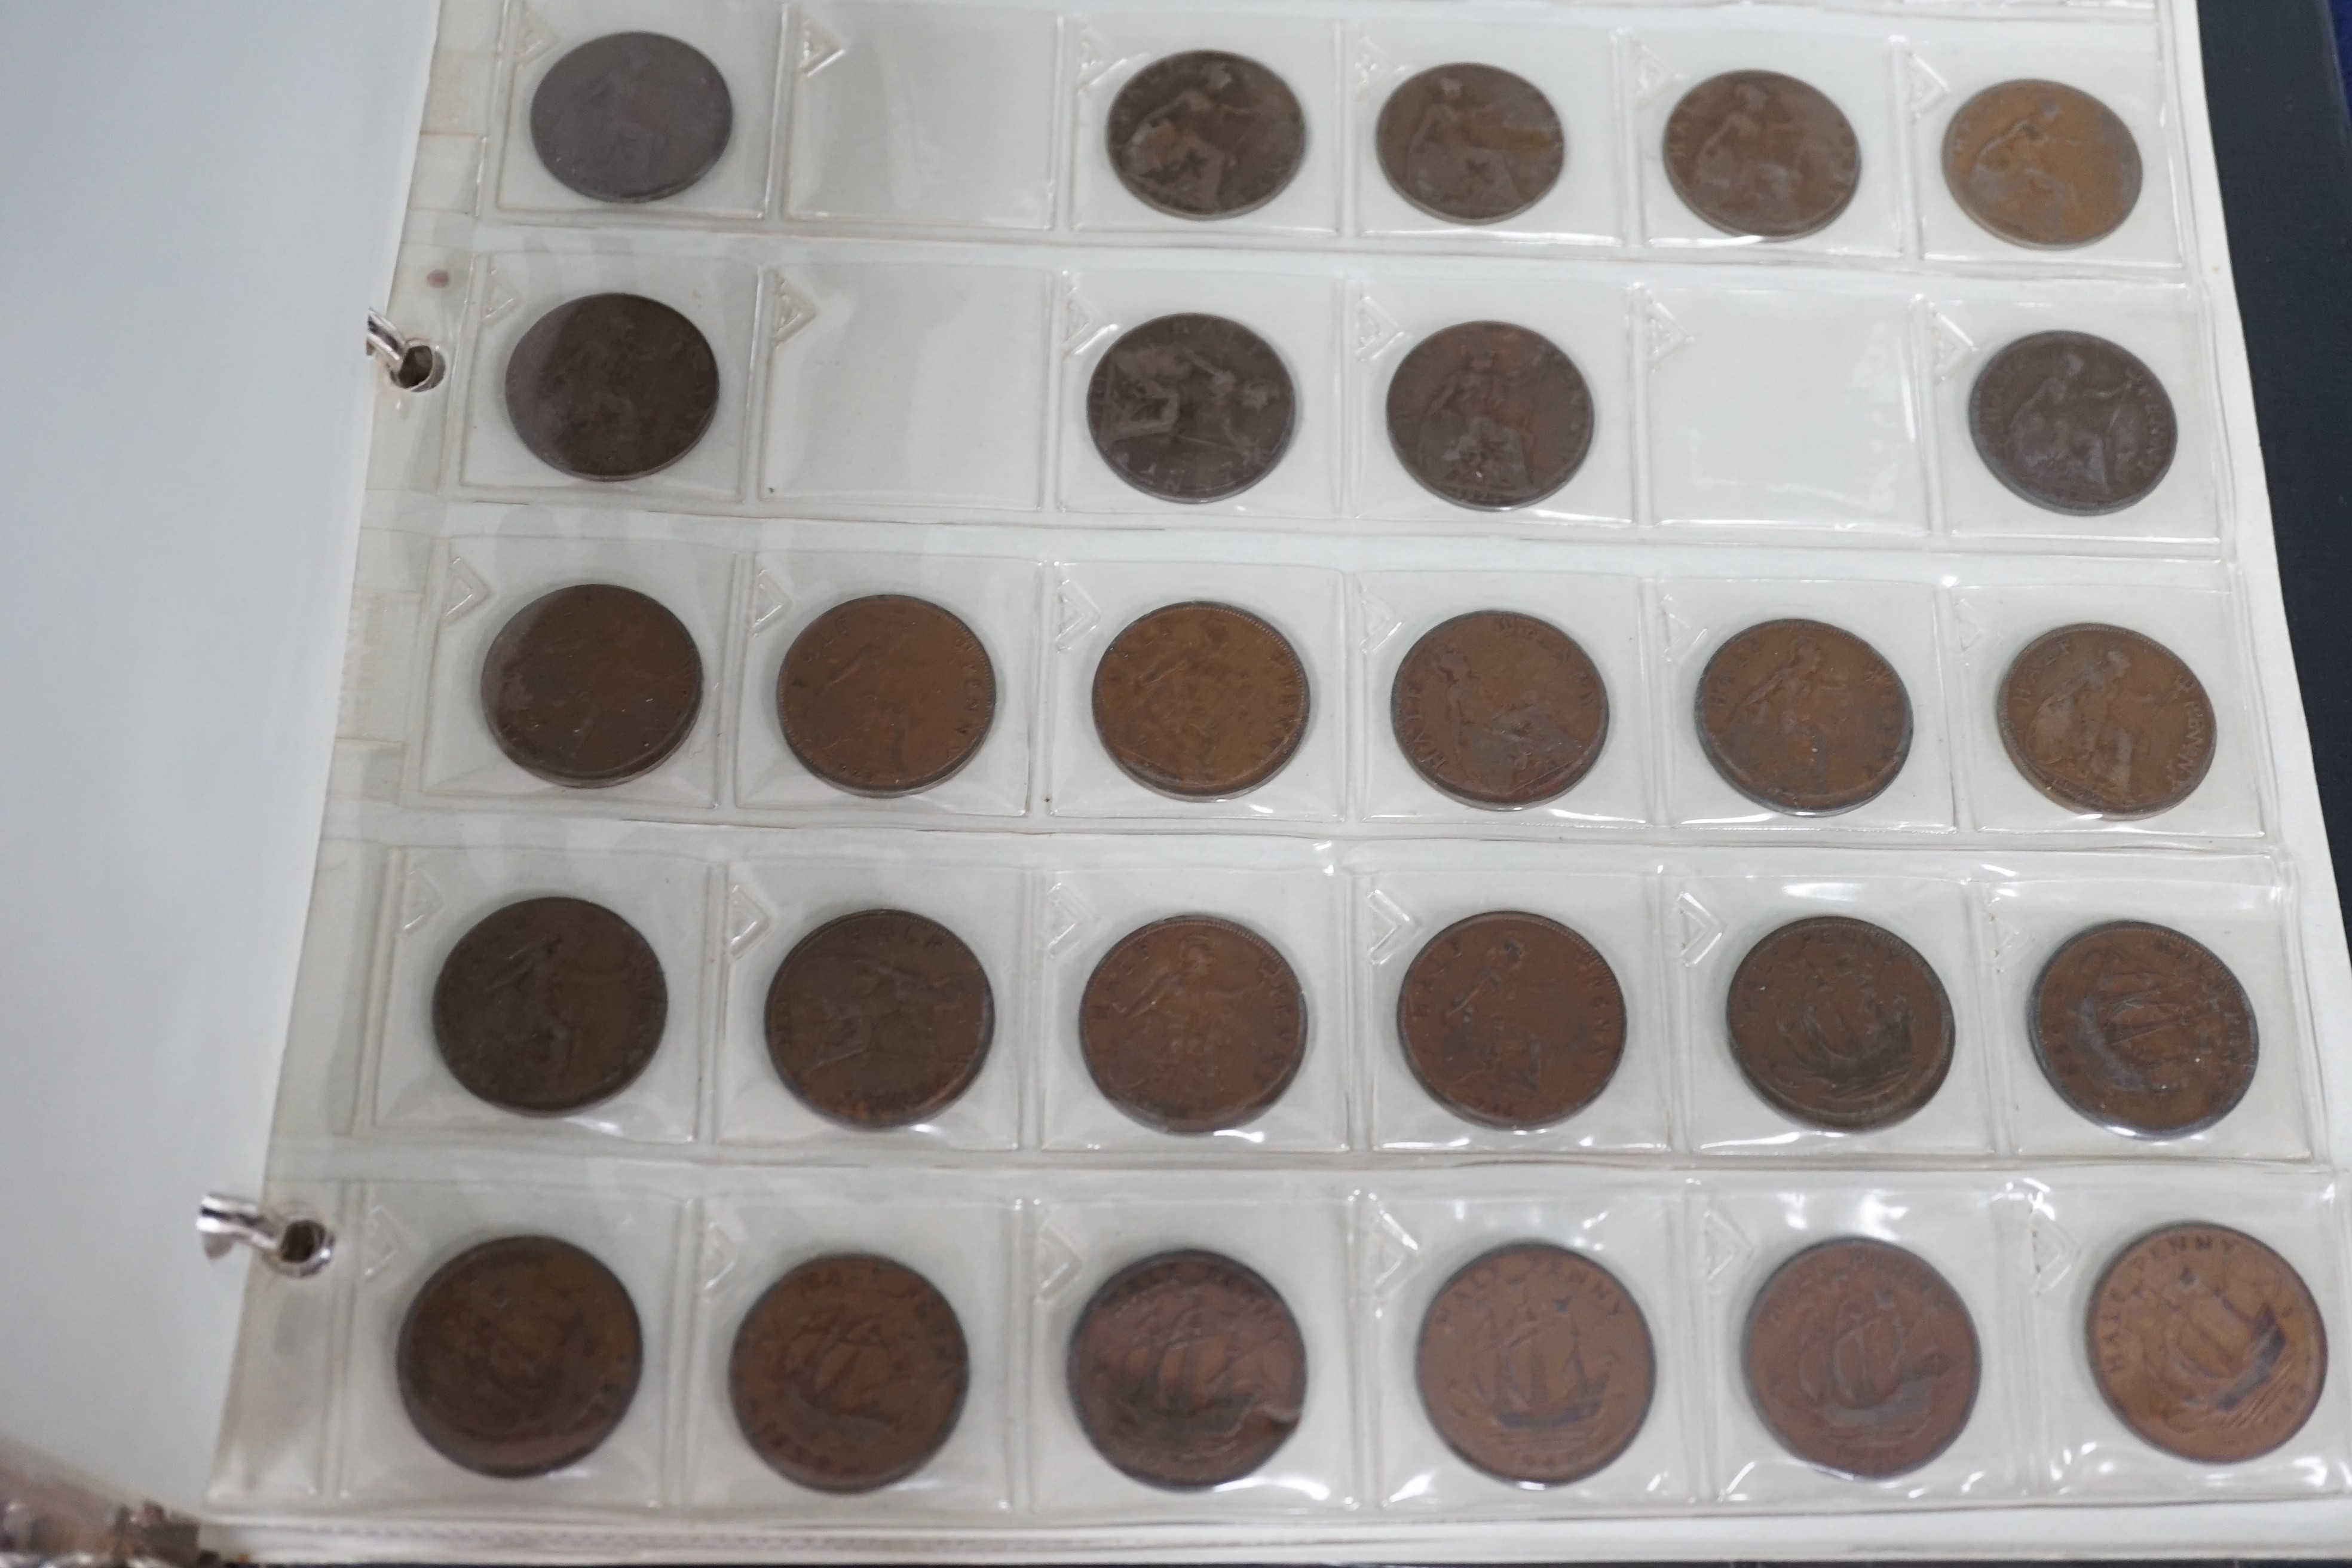 An album of British half pennies and farthings, Charles II to QEII, half pennies include 1730 F, 1806 UNC, 1827 GVD, 1877 lustrous UNC, Farthings including 1788 VF, 1799 EF, 1821 EF and decimal pennies